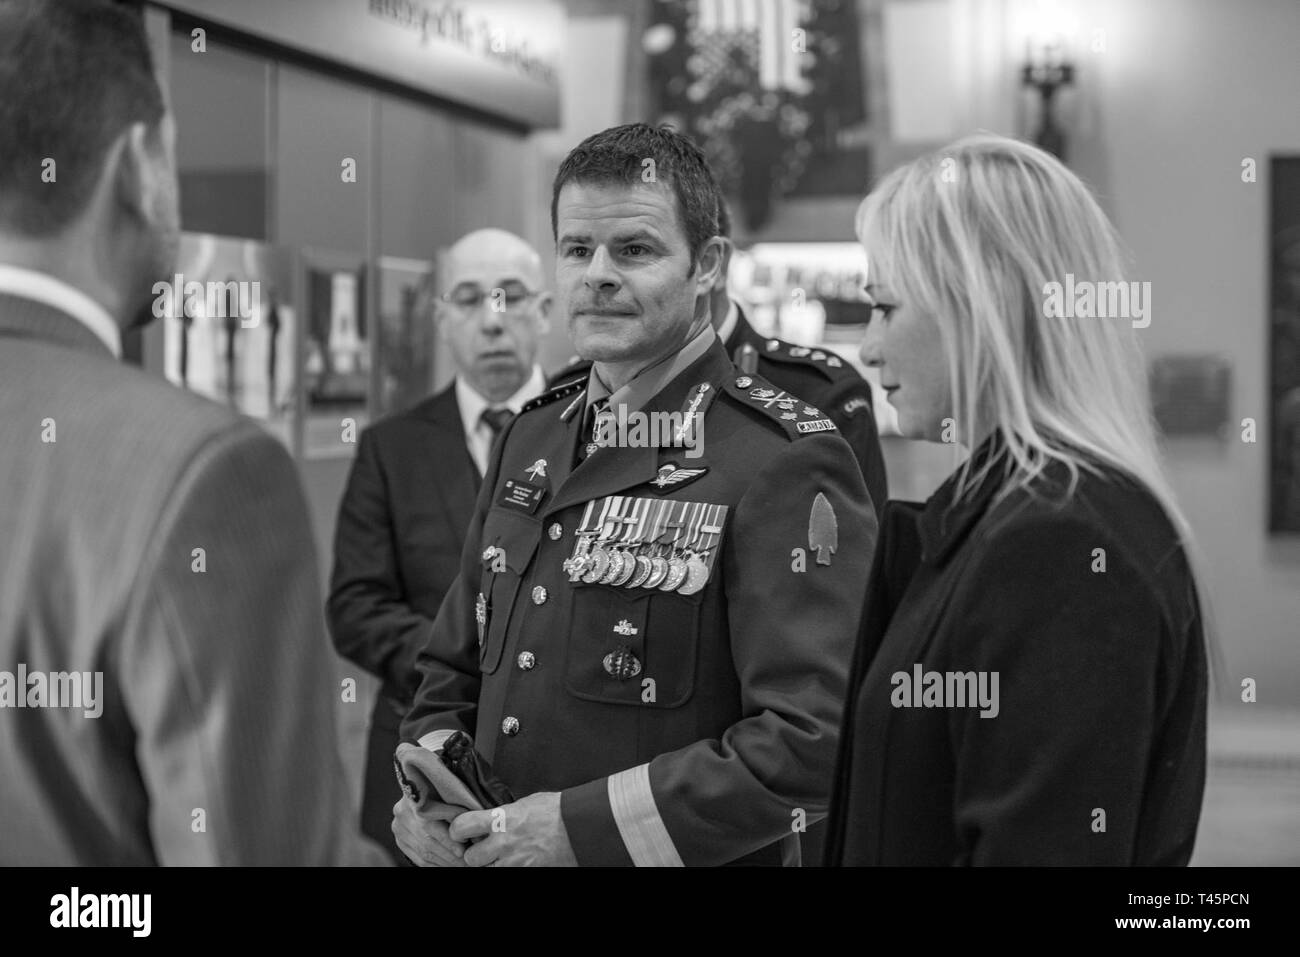 Michael Migliara (left), director of operations, Arlington National Cemetery; speaks with Lt. Gen. M.N. (Mike) Rouleau (center), commander, Canadian Joint Operations Command; and his partner, Andrea Themely (right); in the Memorial Amphitheater Display Room at Arlington National Cemetery, Arlington, Virginia, March 6, 2019. While at the cemetery, Rouleau participated in a Public Wreath-Laying Ceremony at the Tomb of the Unknown Soldier and observed the Changing of the Guard. Stock Photo